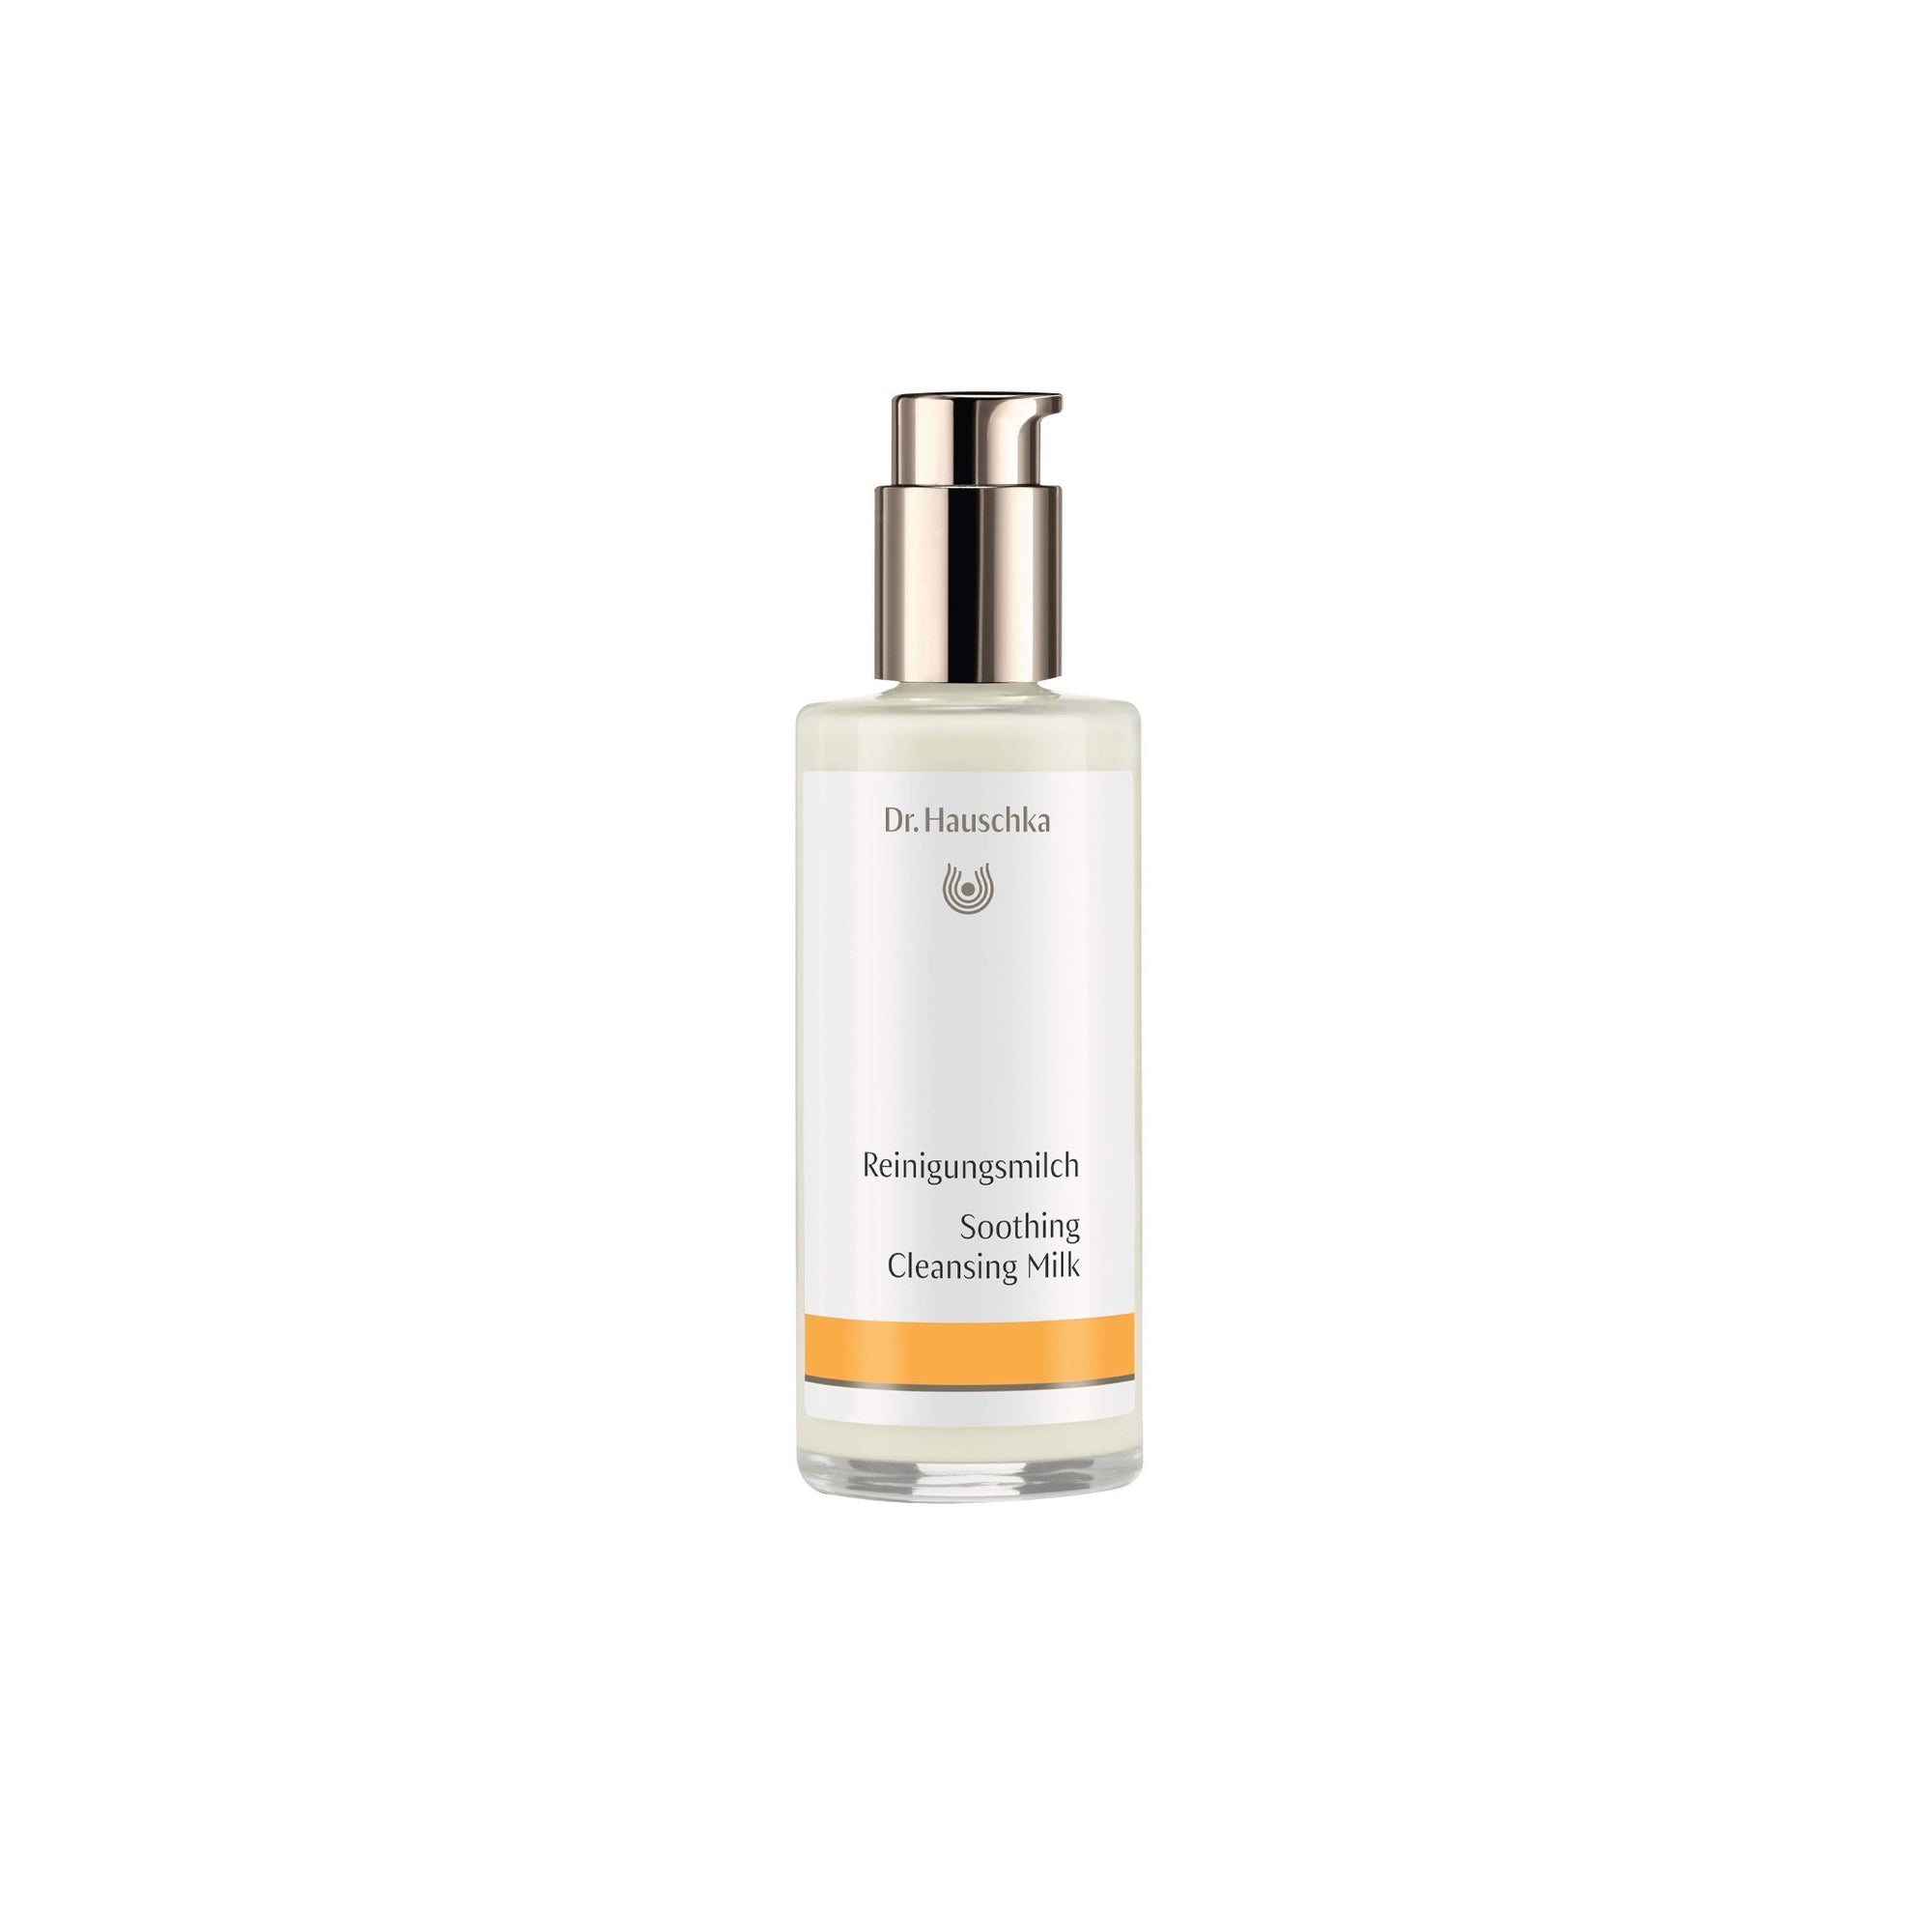 Dr Hauschka Soothing Cleansing Milk 145ml